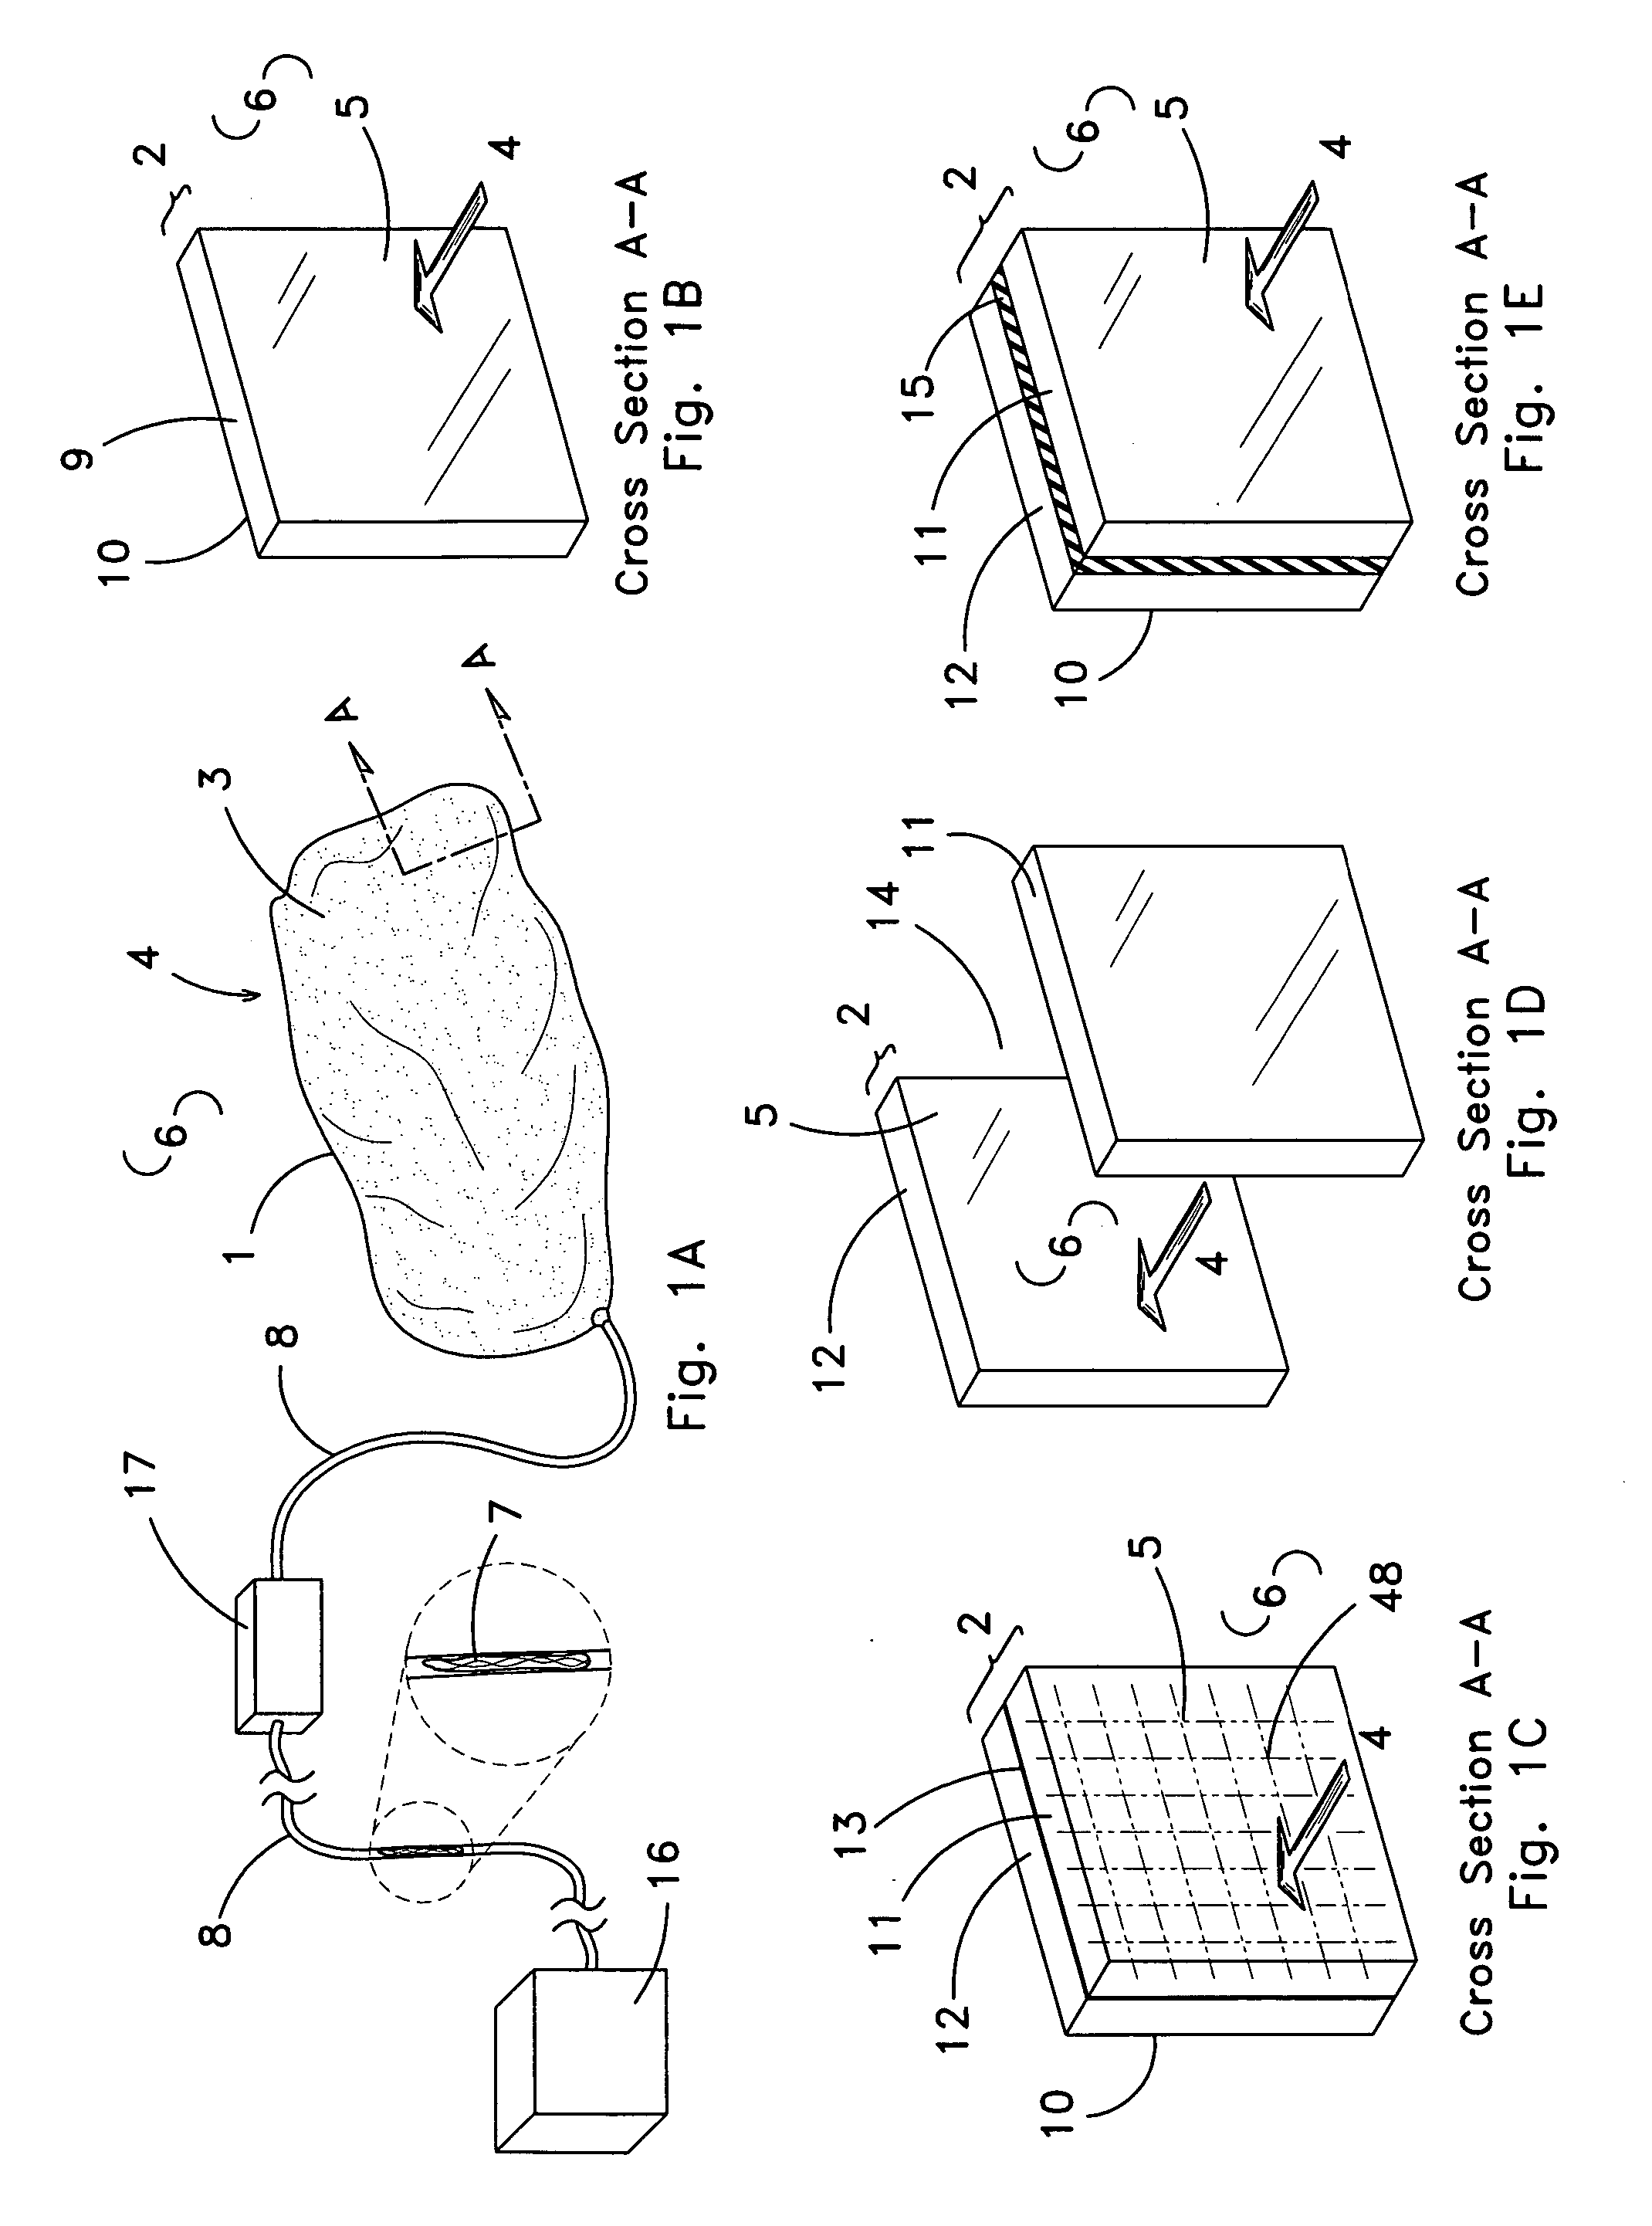 Pressure regulated continuously variable volume container for fluid delivery